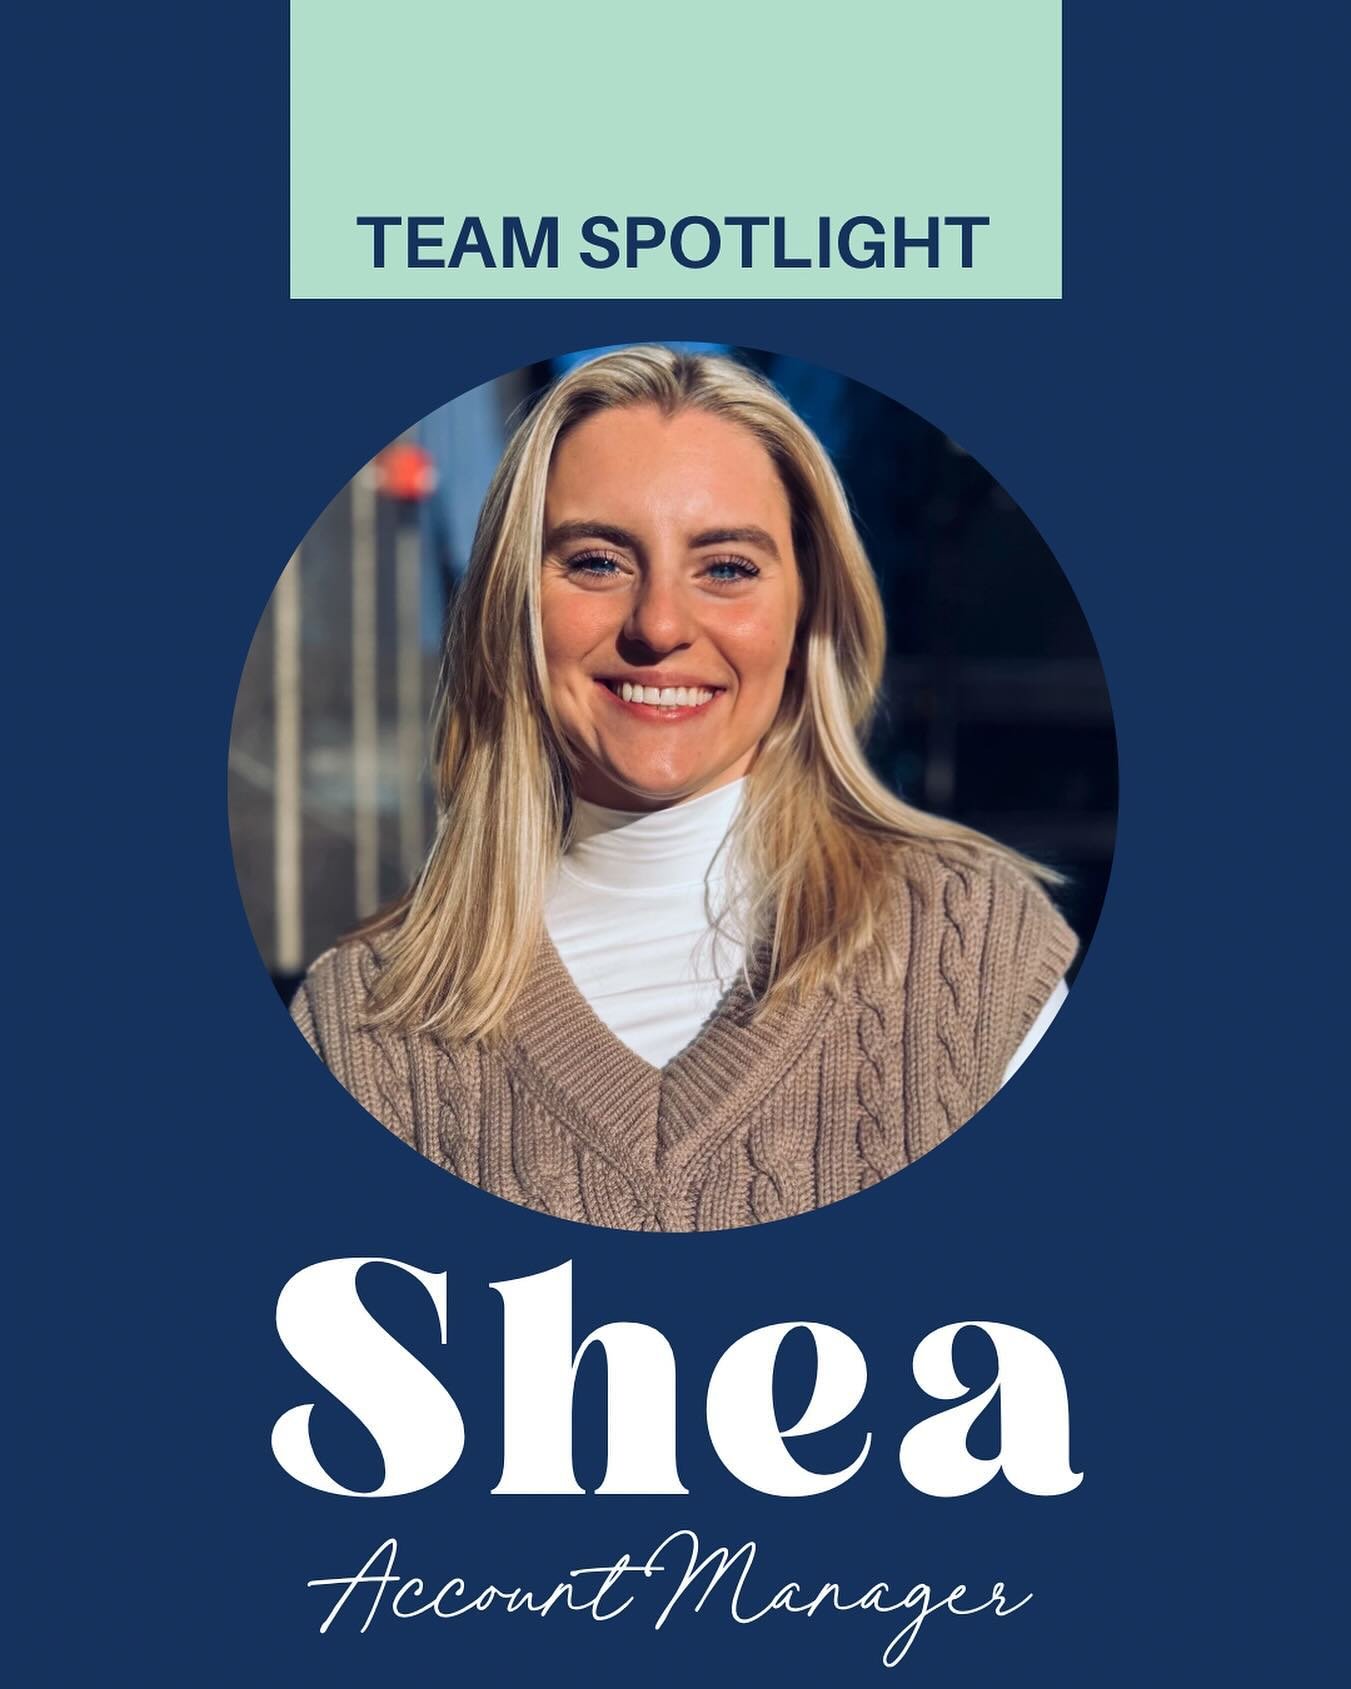 Have you met Shea McGinty?&nbsp;
&nbsp;
Shea brings a whole new level of energy to our team with her infectious humor and unstoppable ambition!
&nbsp;
With an extensive background in retail account management, she&rsquo;s no stranger to the industry.